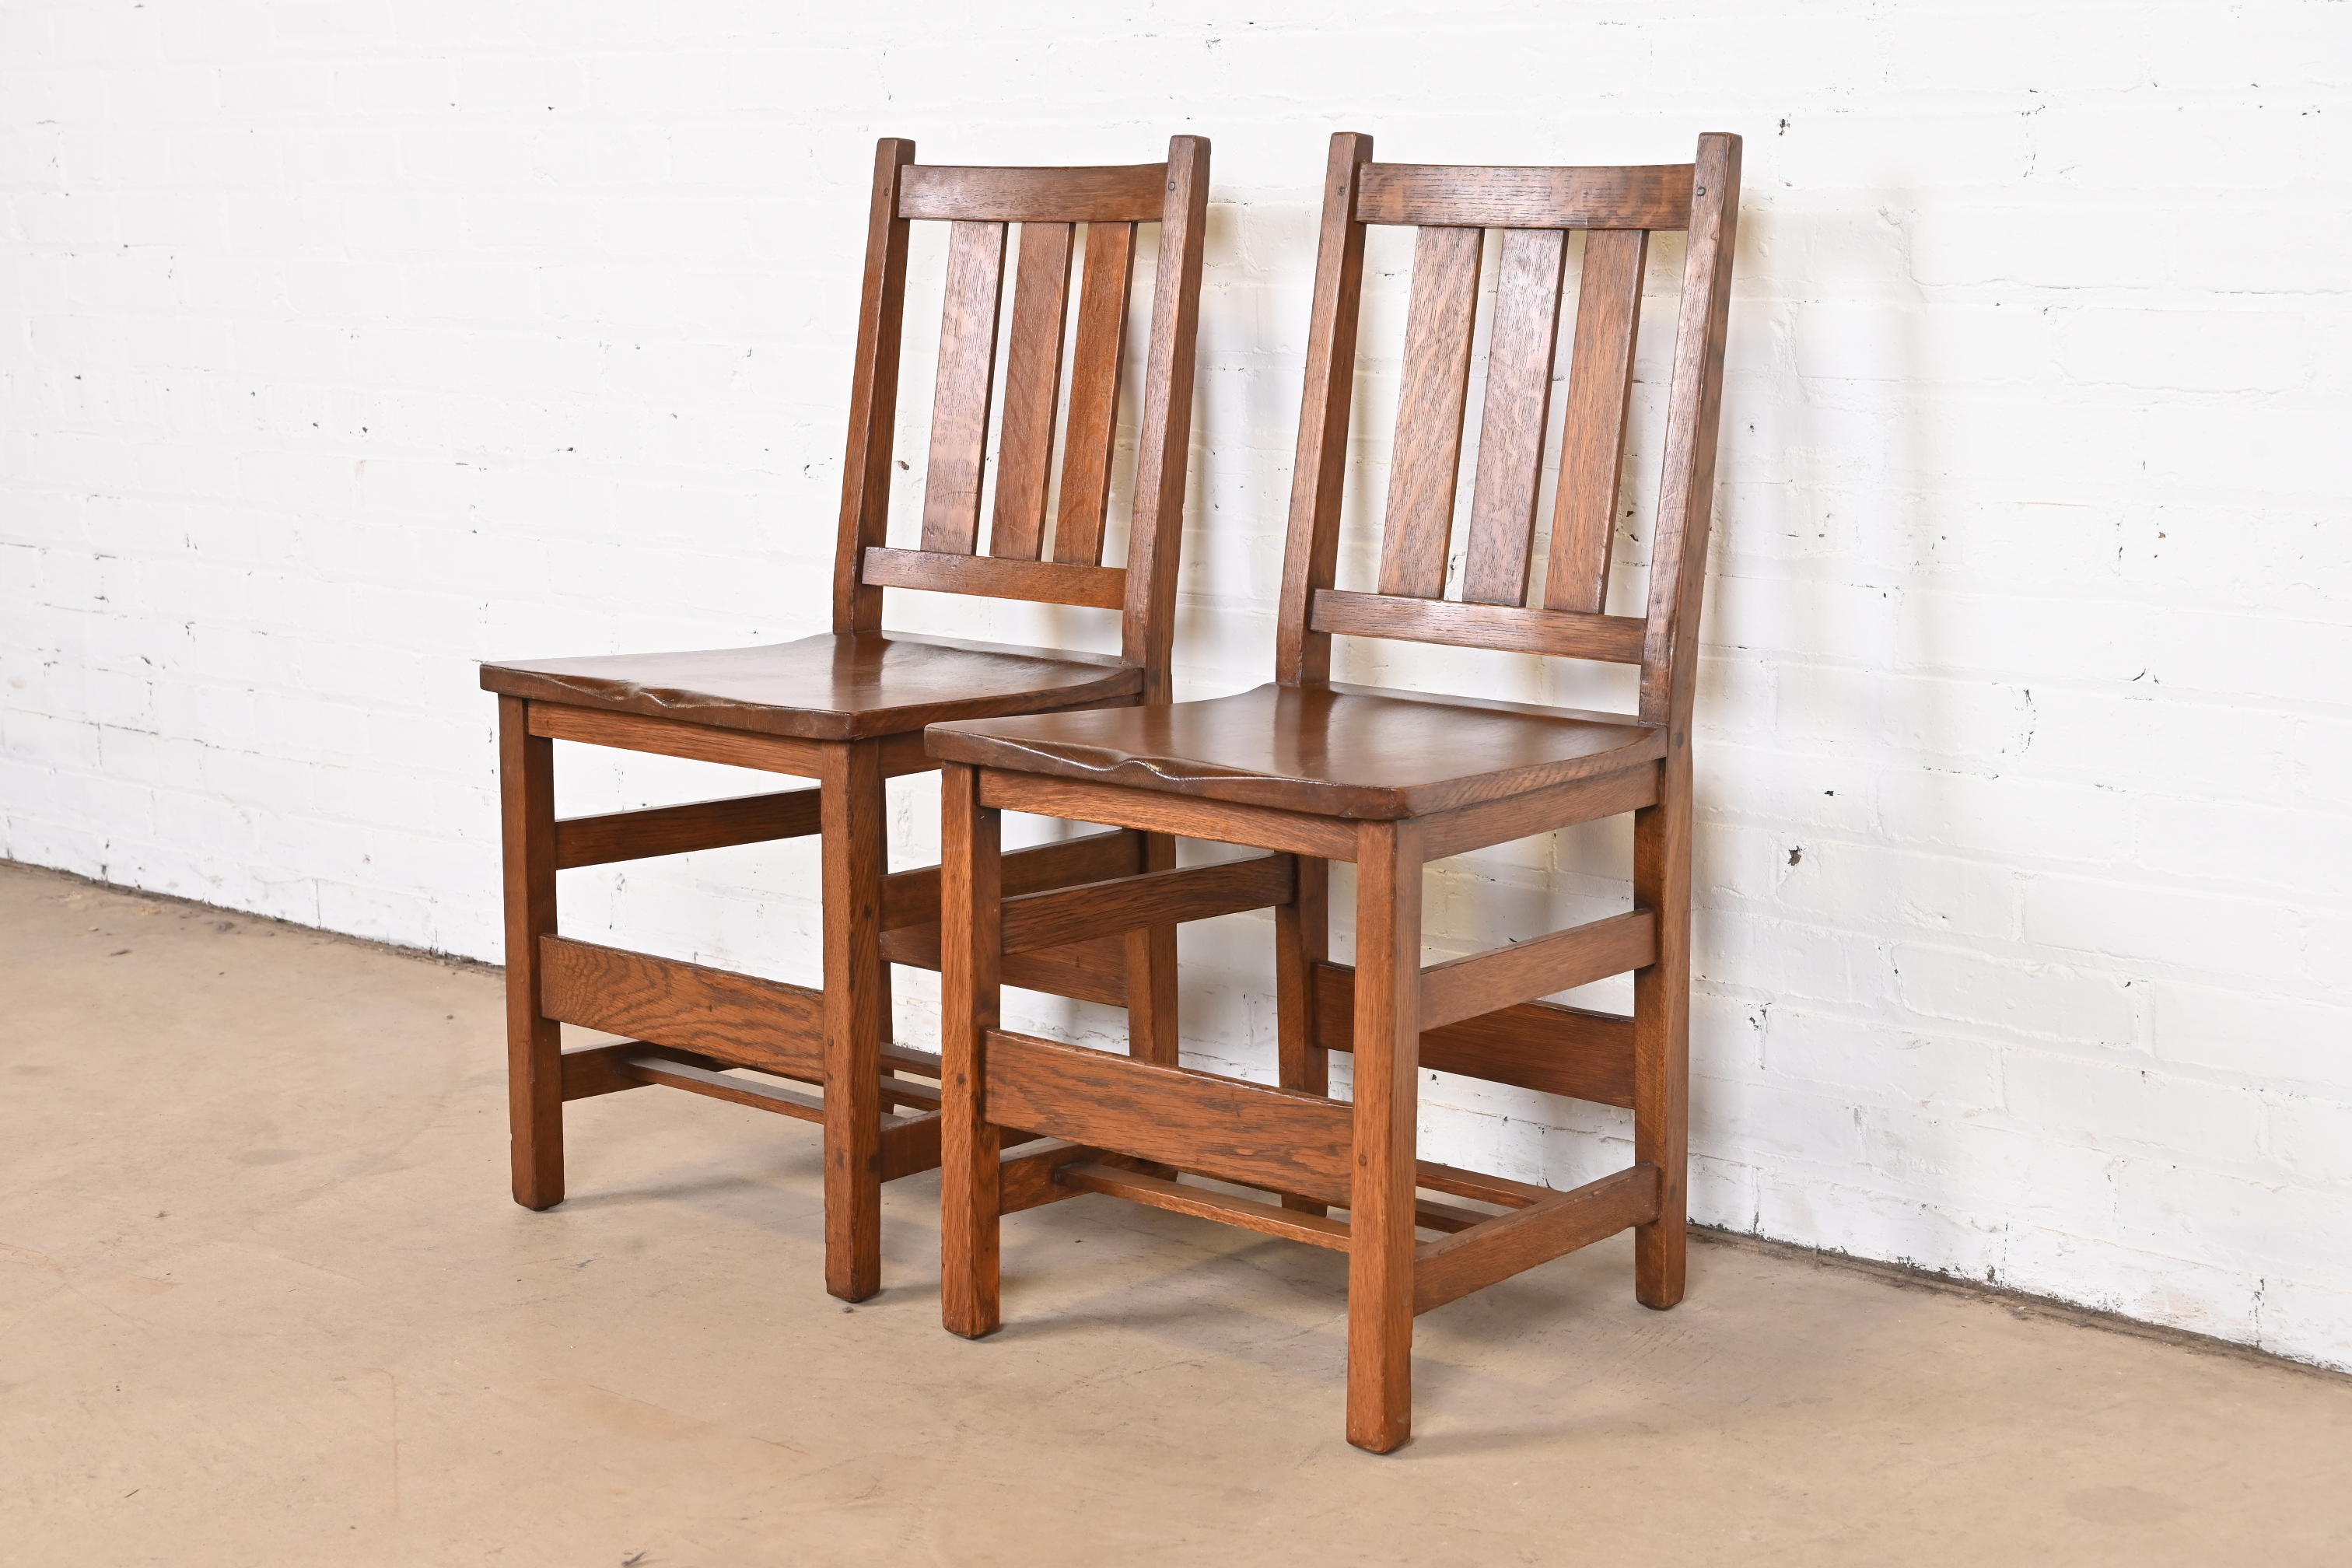 A beautiful pair of solid quarter sawn oak Mission or Arts & Crafts side chairs or dining chairs

By L. & J.G. Stickley

USA, Circa 1900

Measures: 17.63